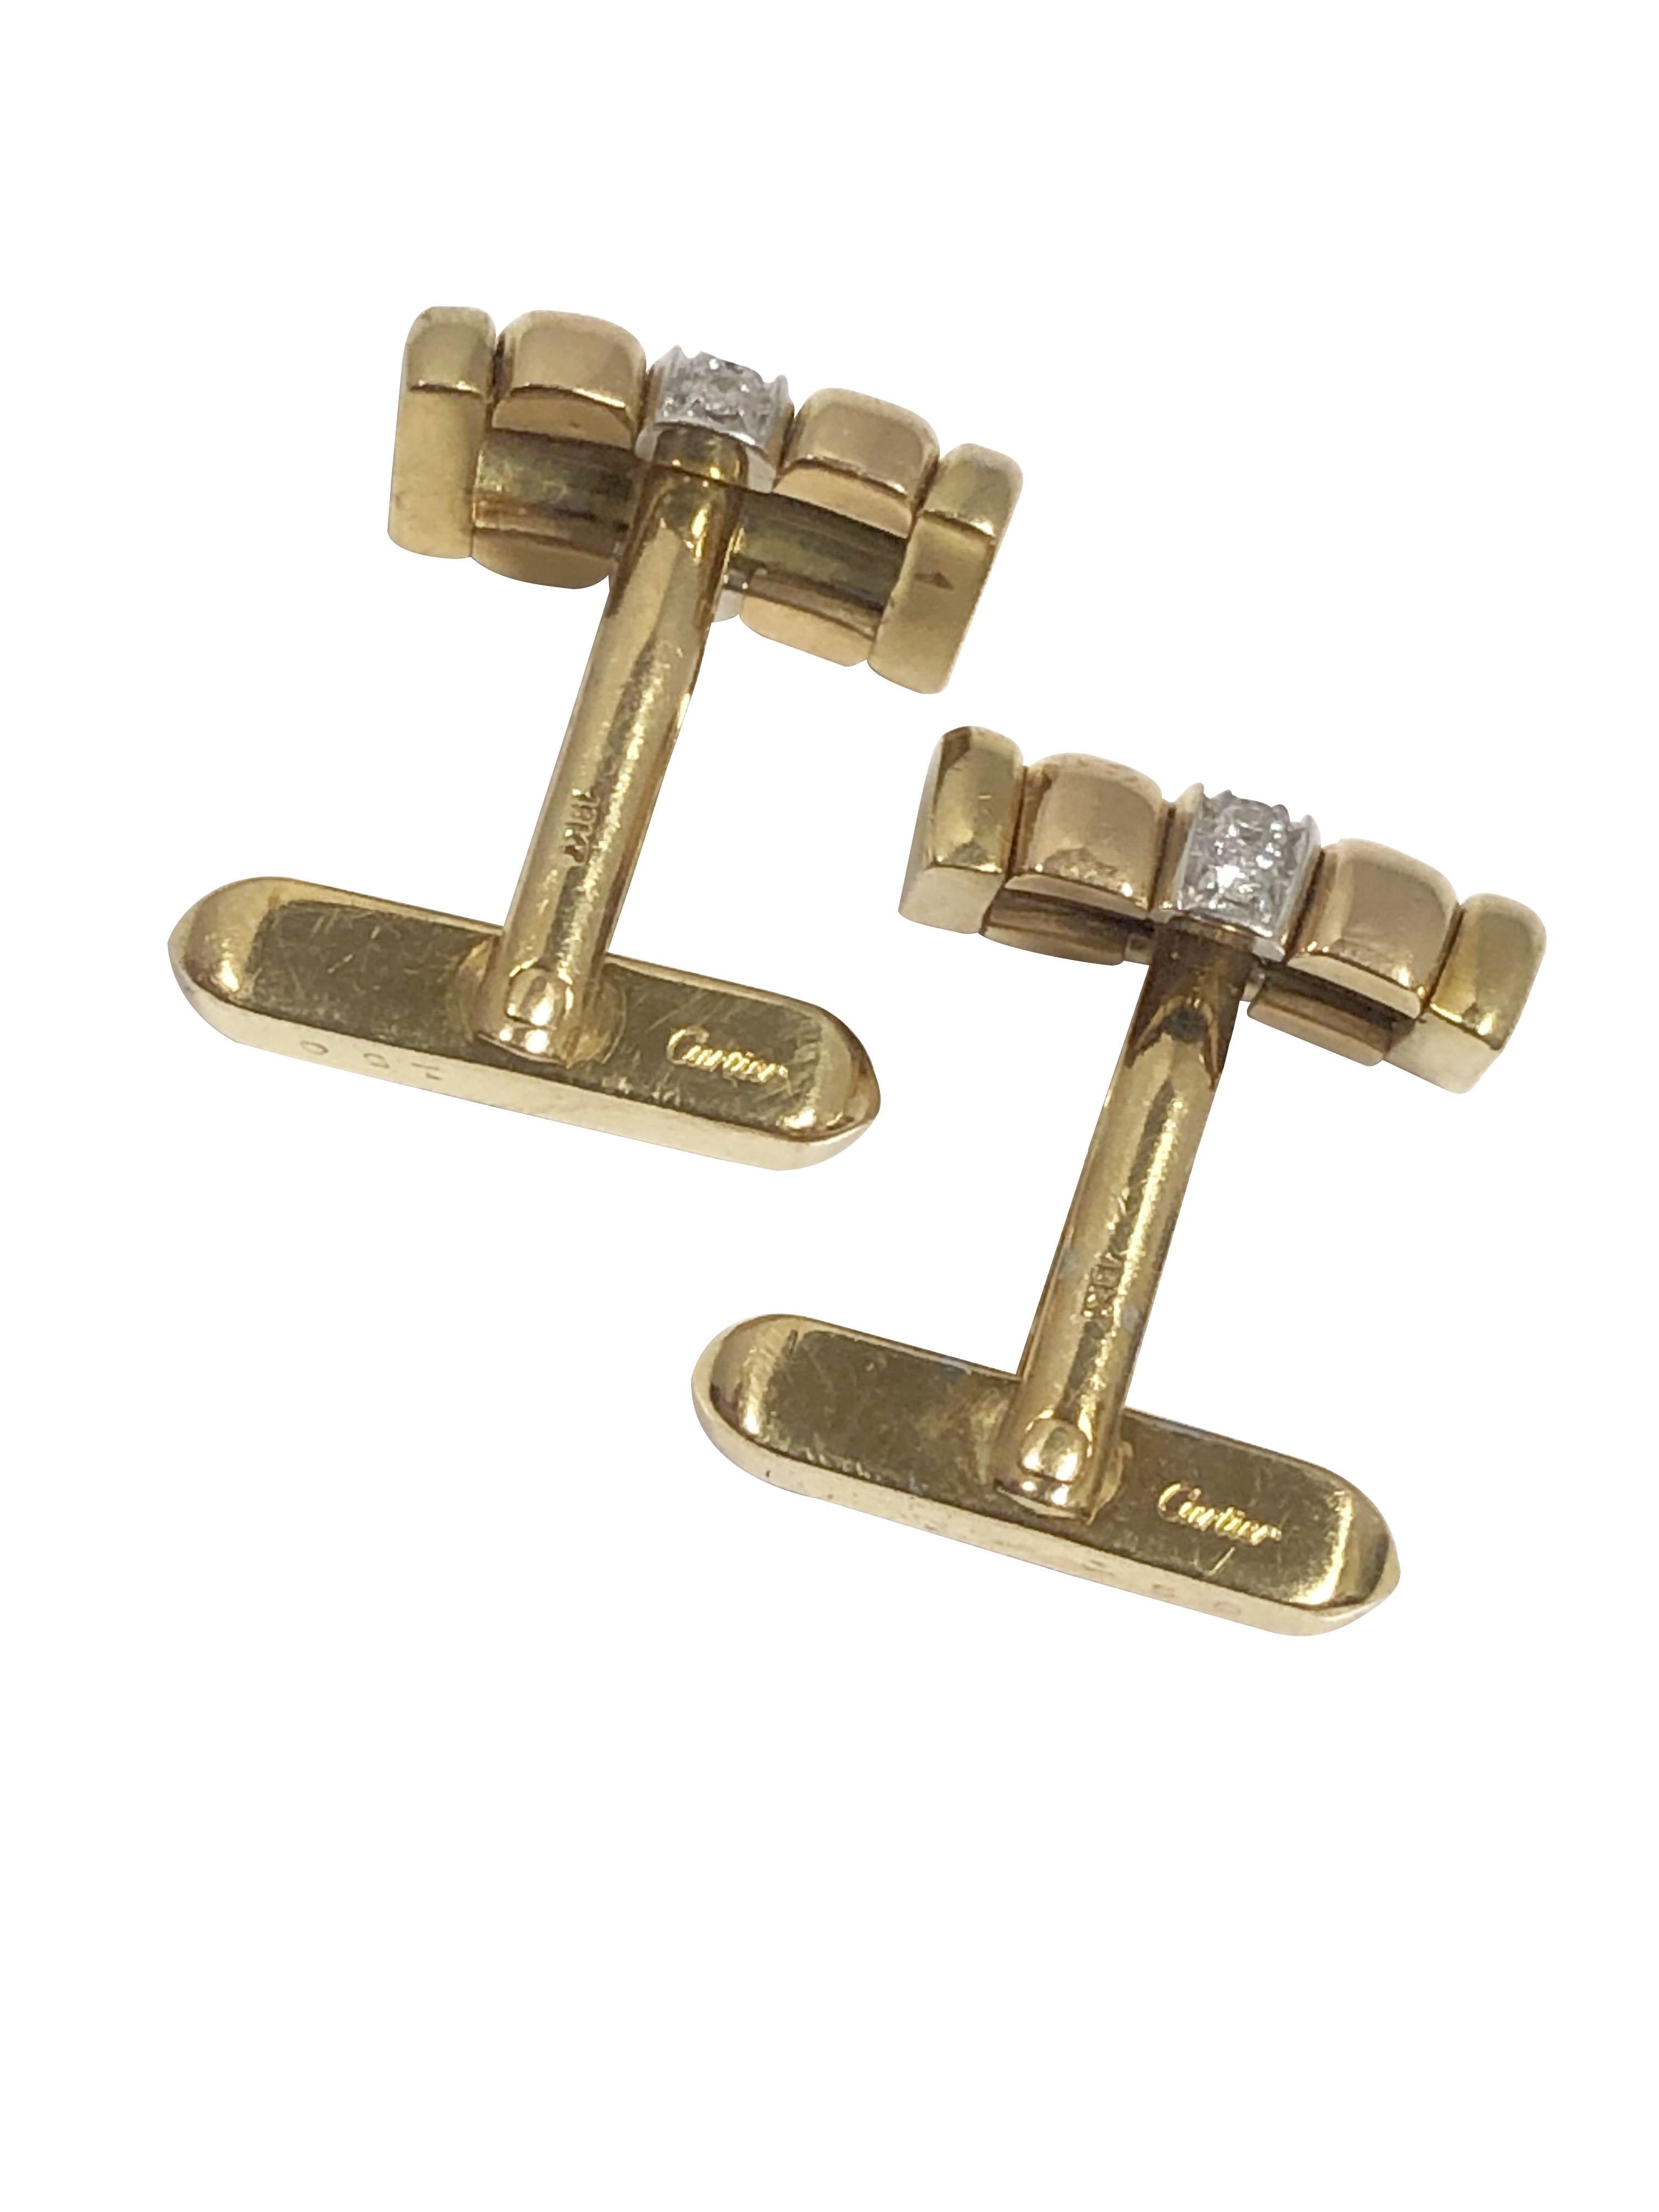 Circa 1990s Cartier 18k Yellow Gold Cufflinks, the tops measure 5/8 inch in length and 1/4 inch wide, nice solid construction with a weight of 14 Grams, the White Gold center section is set with Round Brilliant cut Diamonds totaling 1/4 Carat.